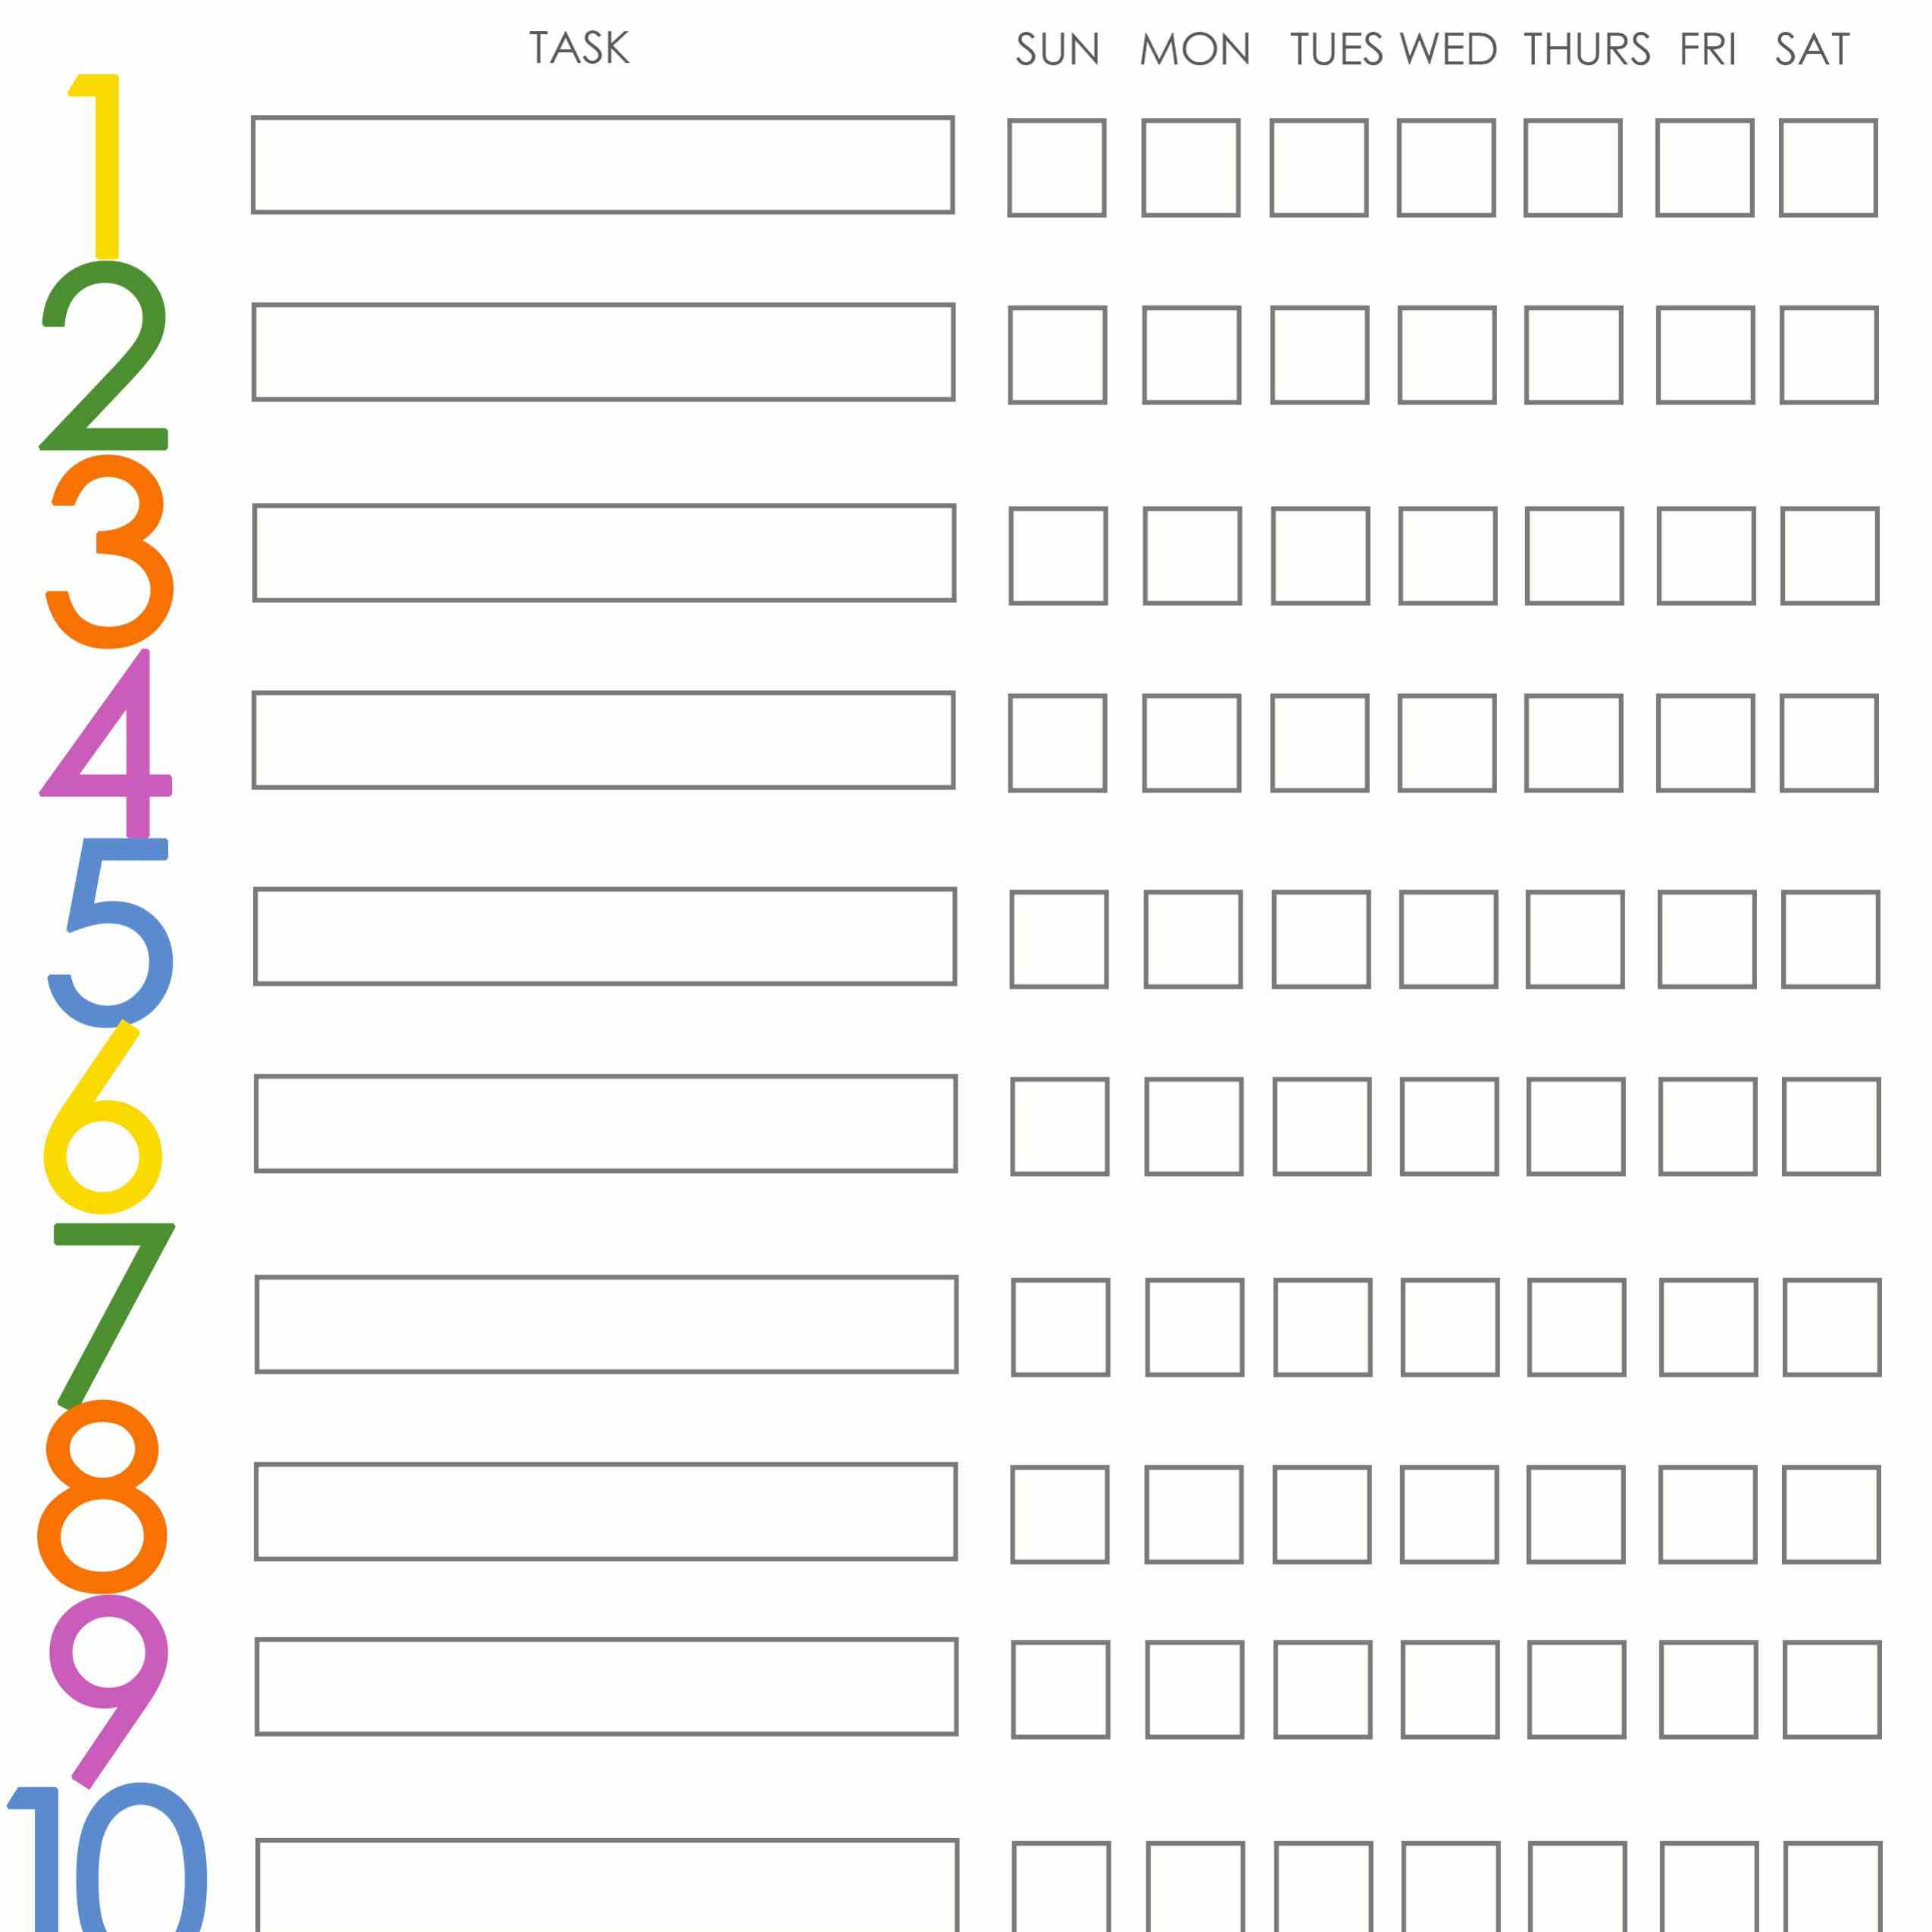 Free Printable Weekly Chore Charts - Free Printable Chore Charts For Kids With Pictures